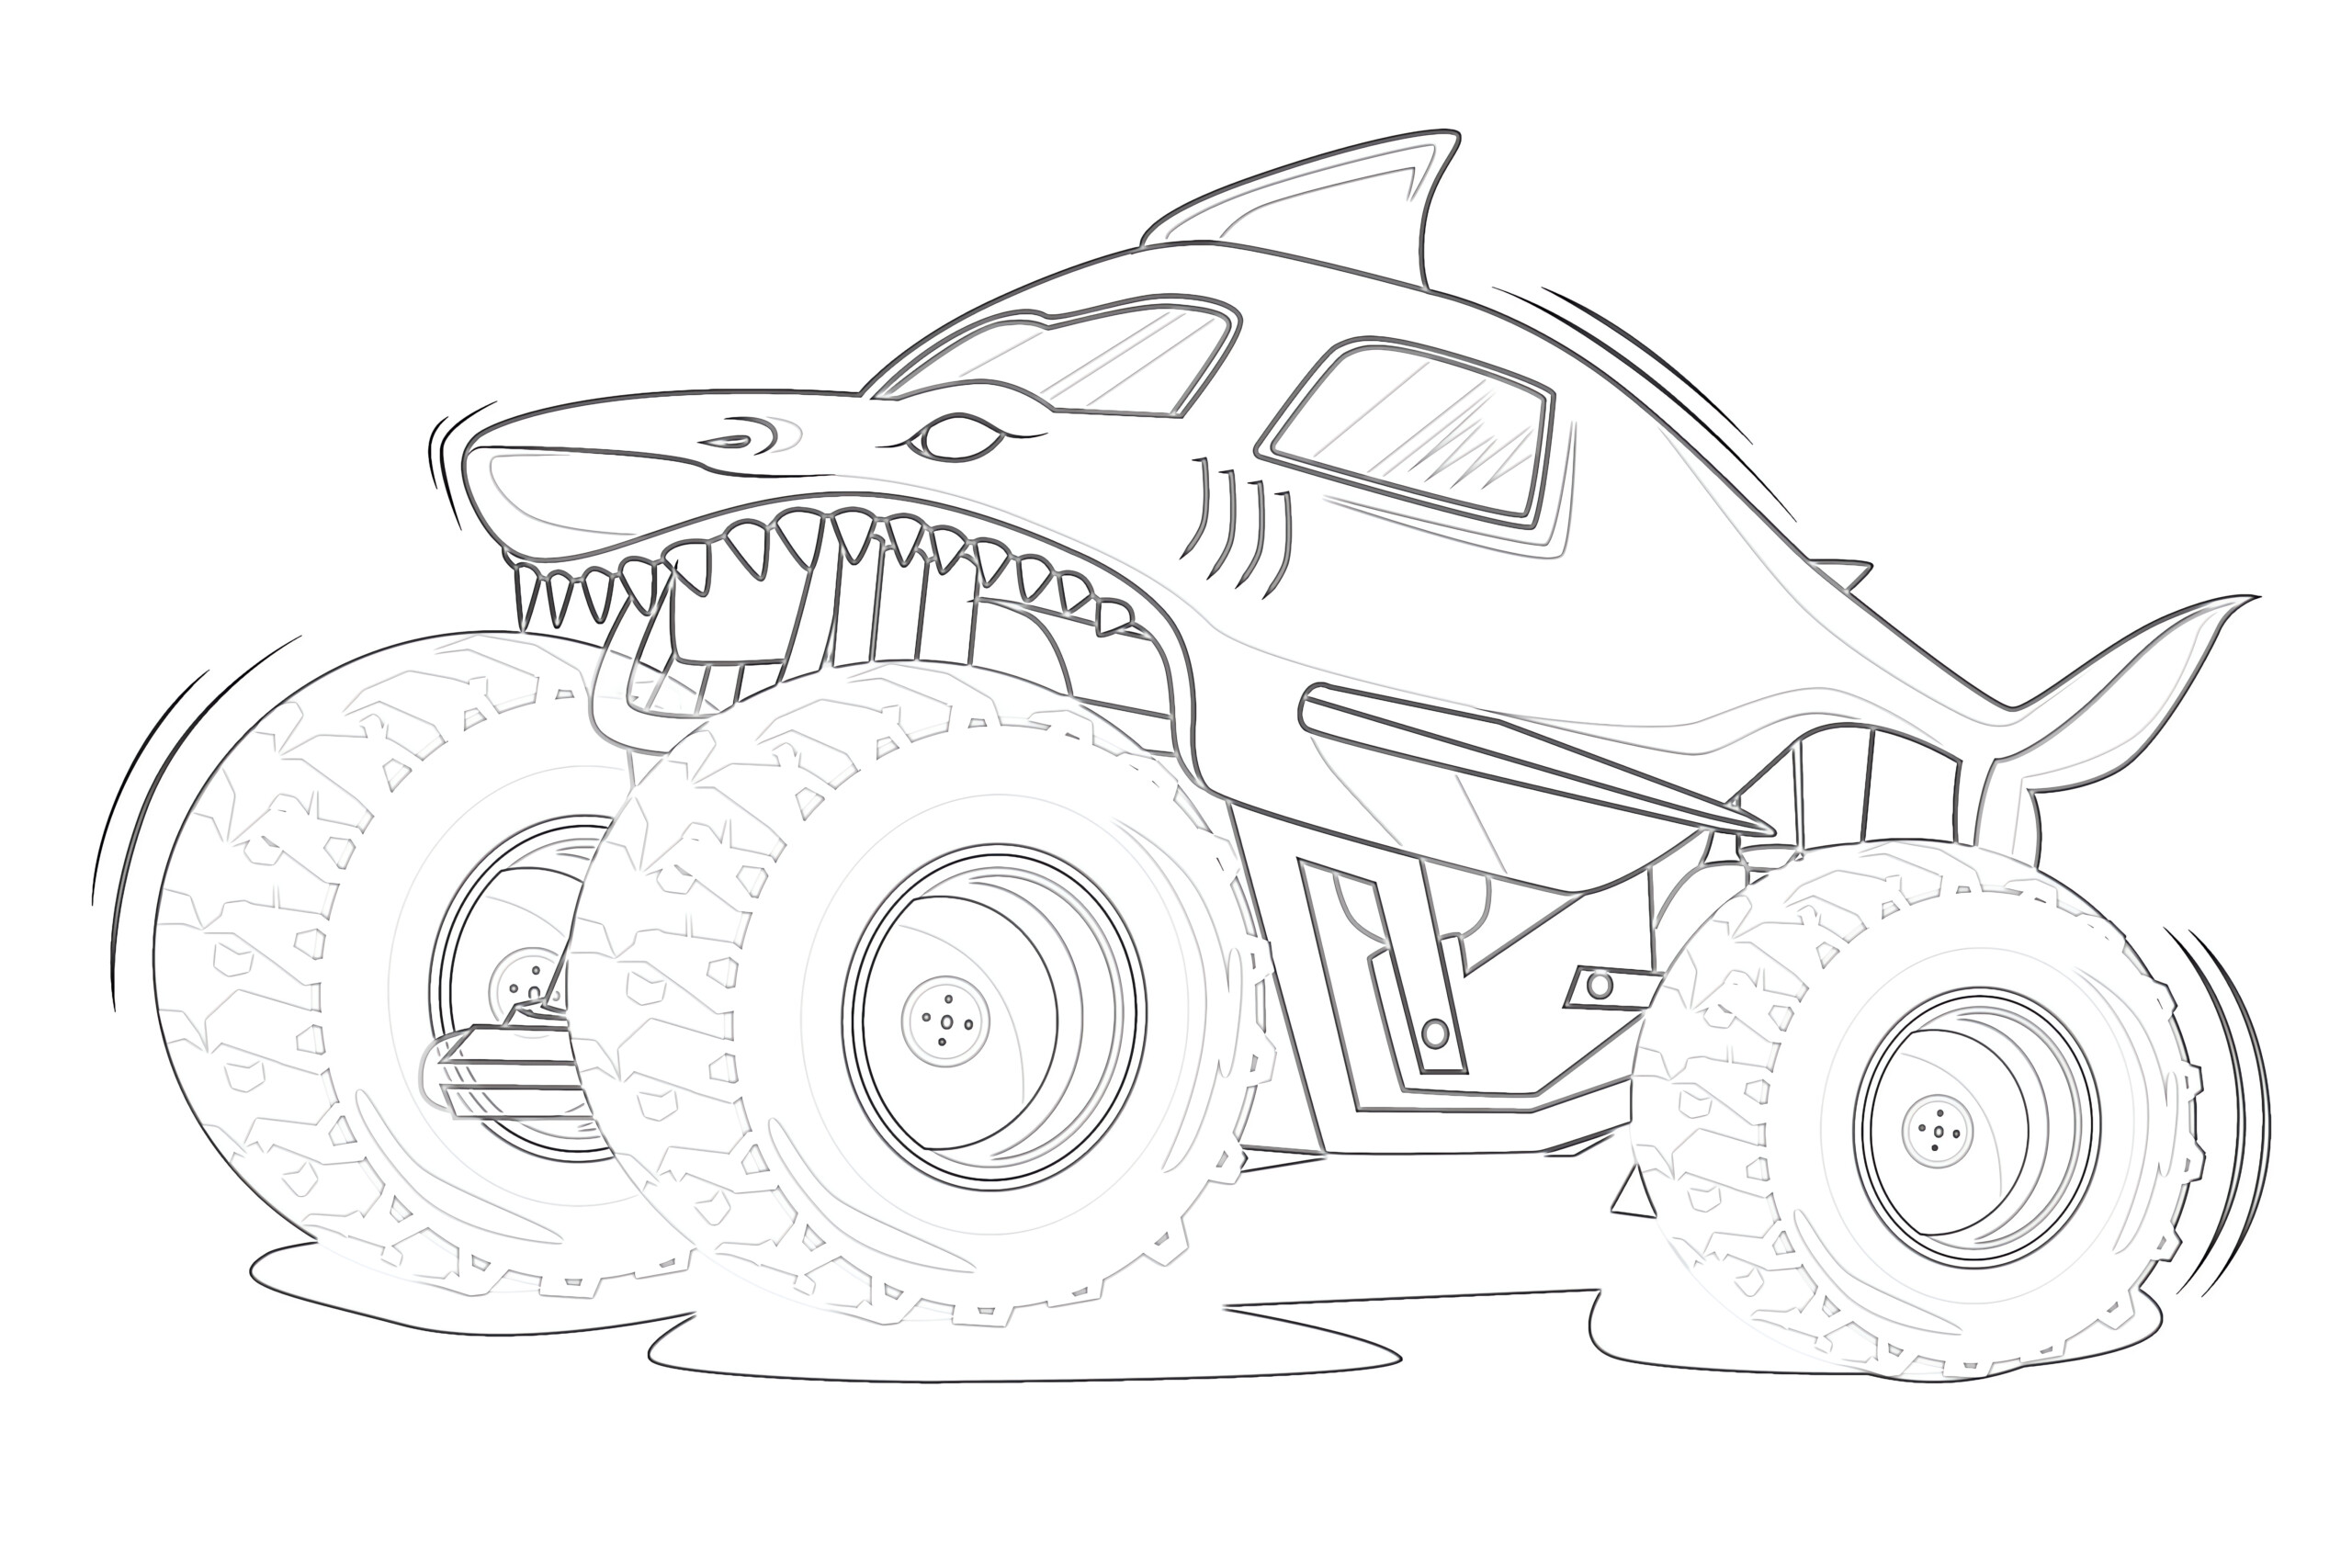 Shark Monster Truck - Coloring page